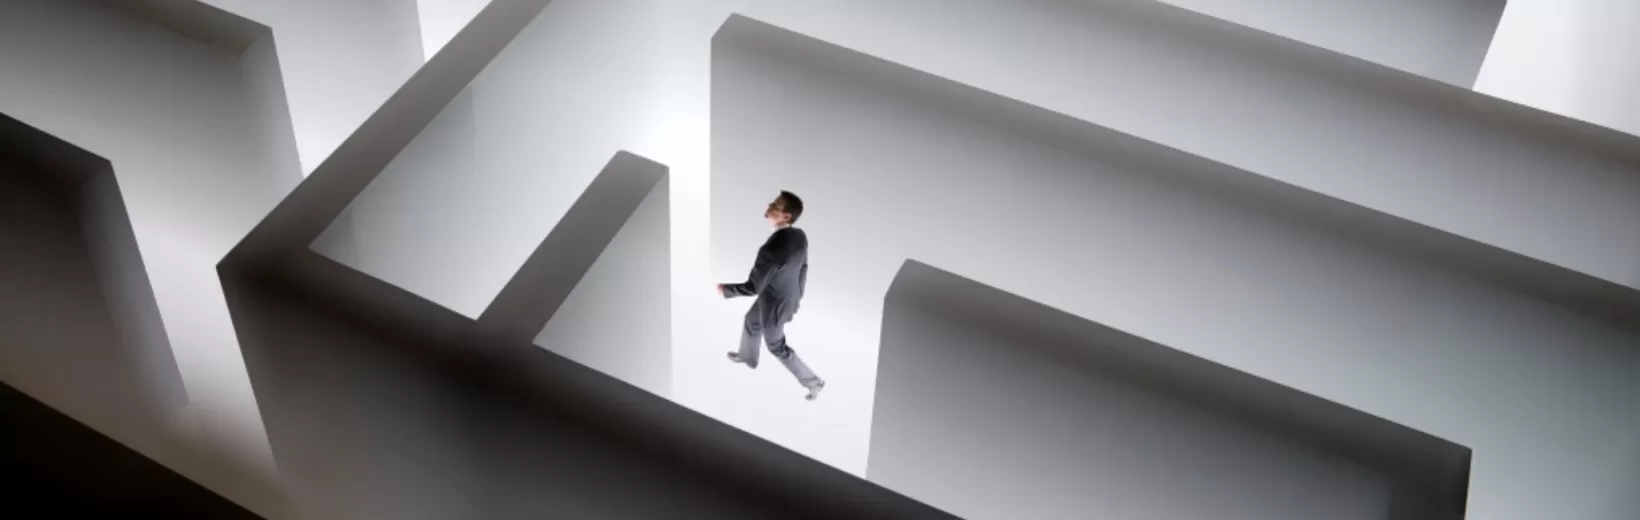 Illustration of a man walking in a maze